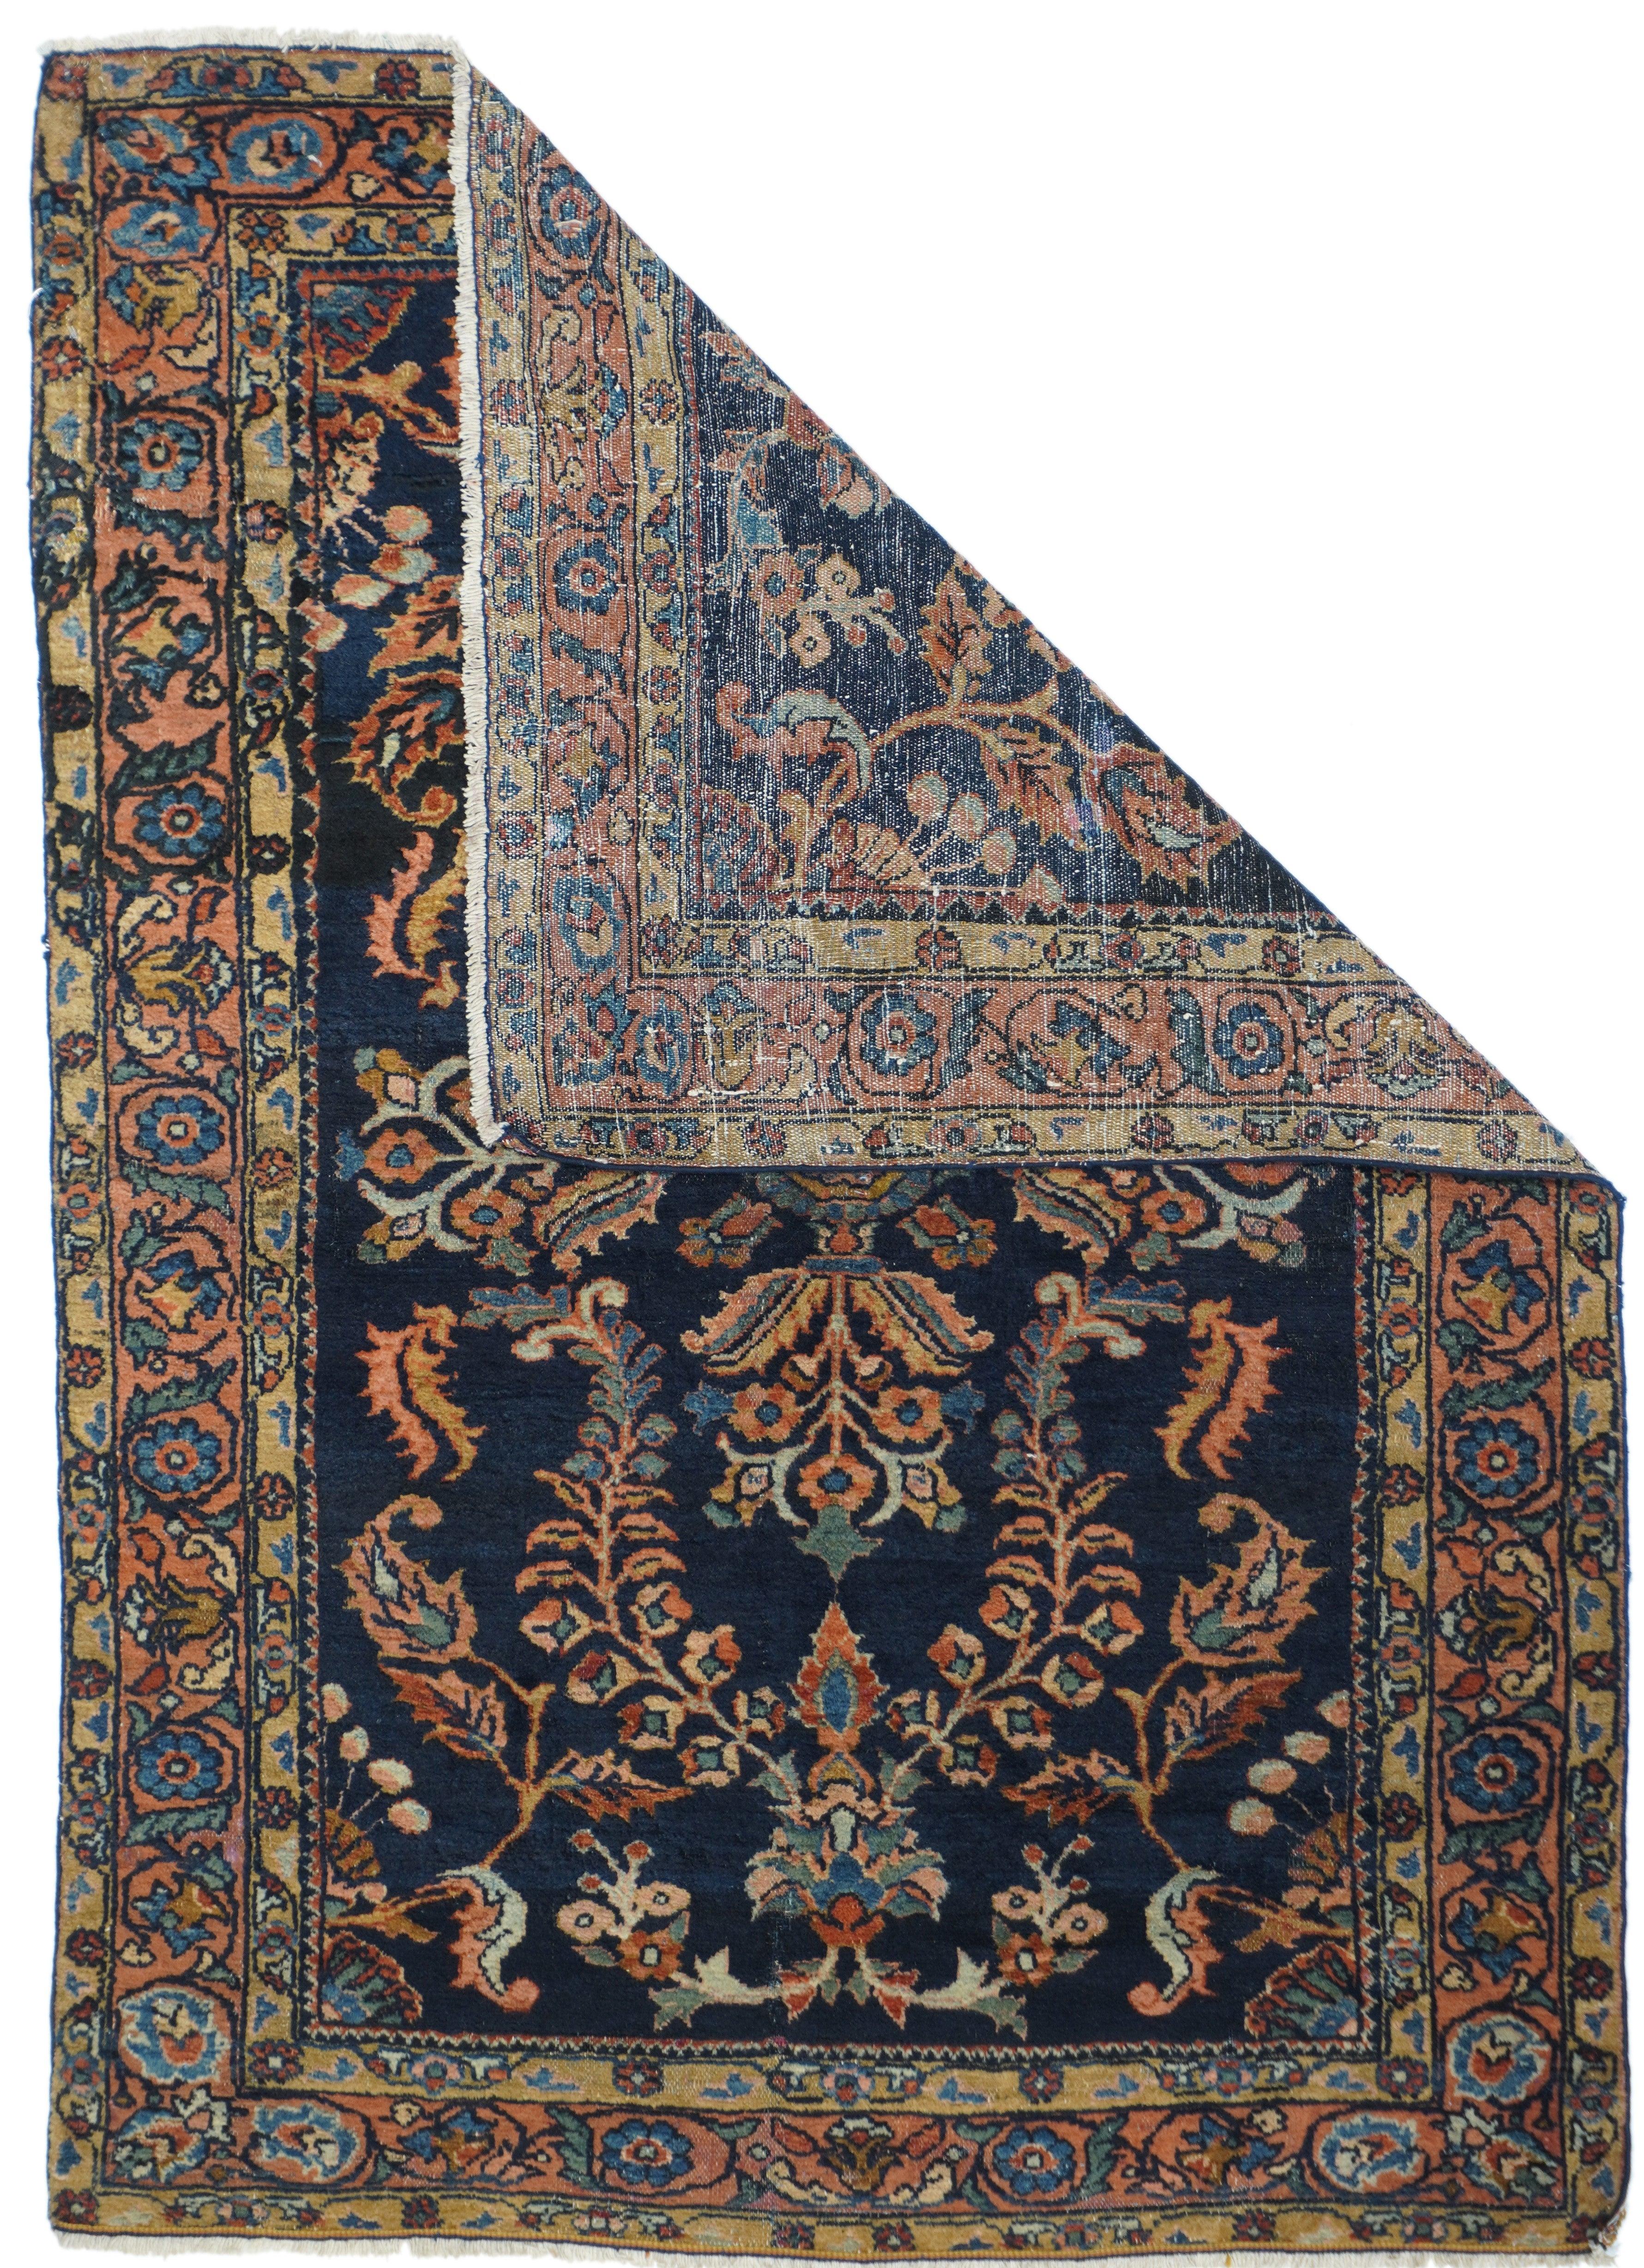 Antique Armani Baft Lilihan rug, measures :  3'4'' x 4'8''. The best Sarouks come from the West Persian village of Mohajeran, and almost all are navy blue. The well-drawn, centralized 